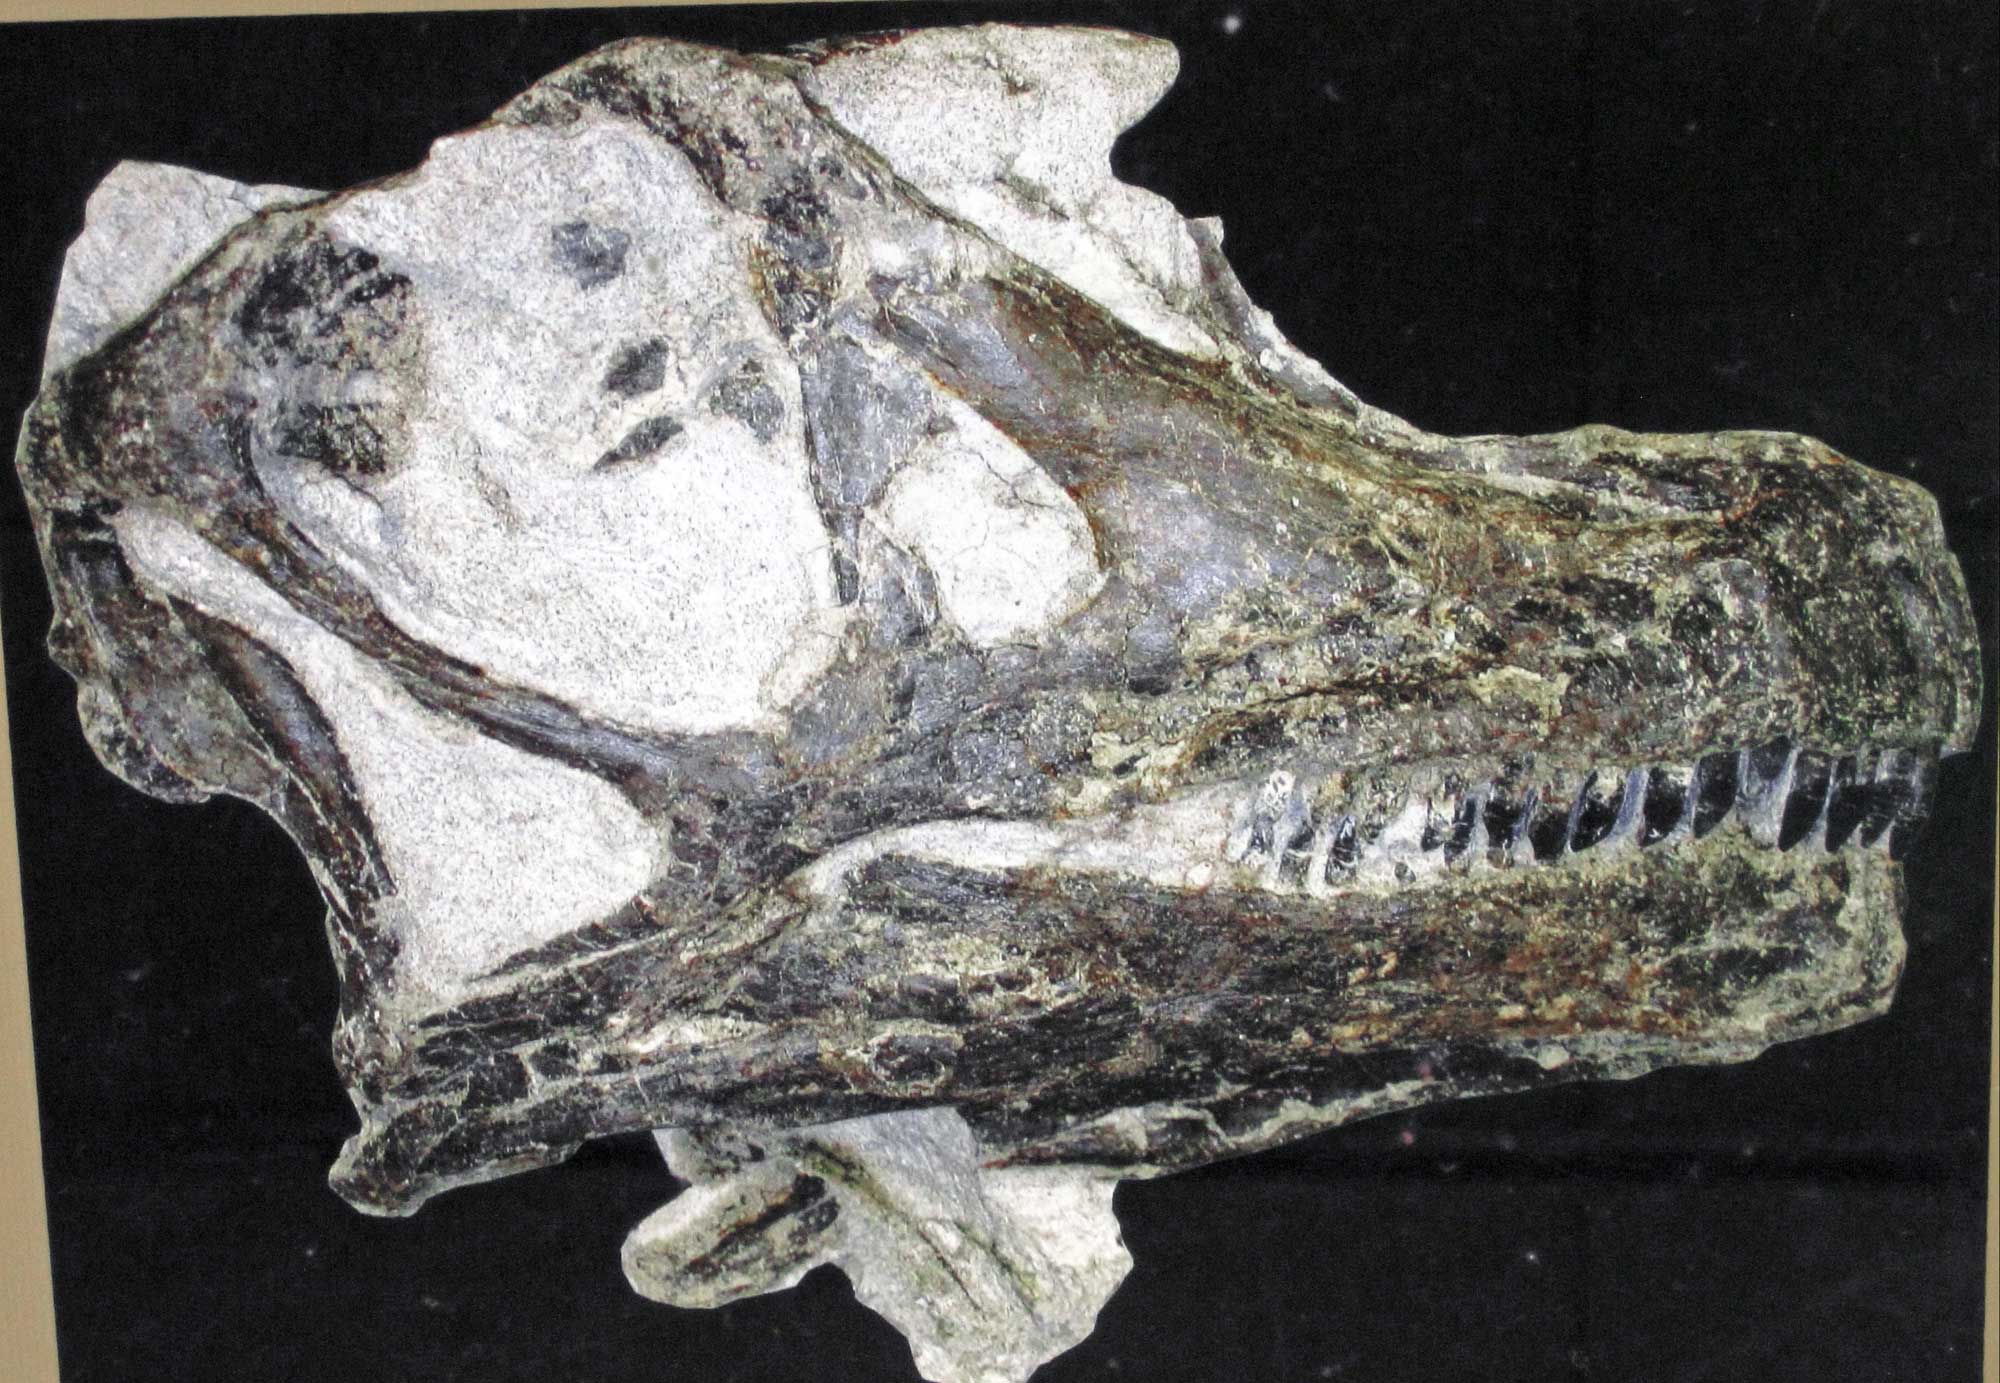 Photograph of the skull of Abydosaurus from the Cretaceous of Utah shown in side view. The skull is tall at the back (near the neck) and much shorter near the mount. The teeth are relatively short and appear pointed. The skull has three large openings (fenestrae) on its side.